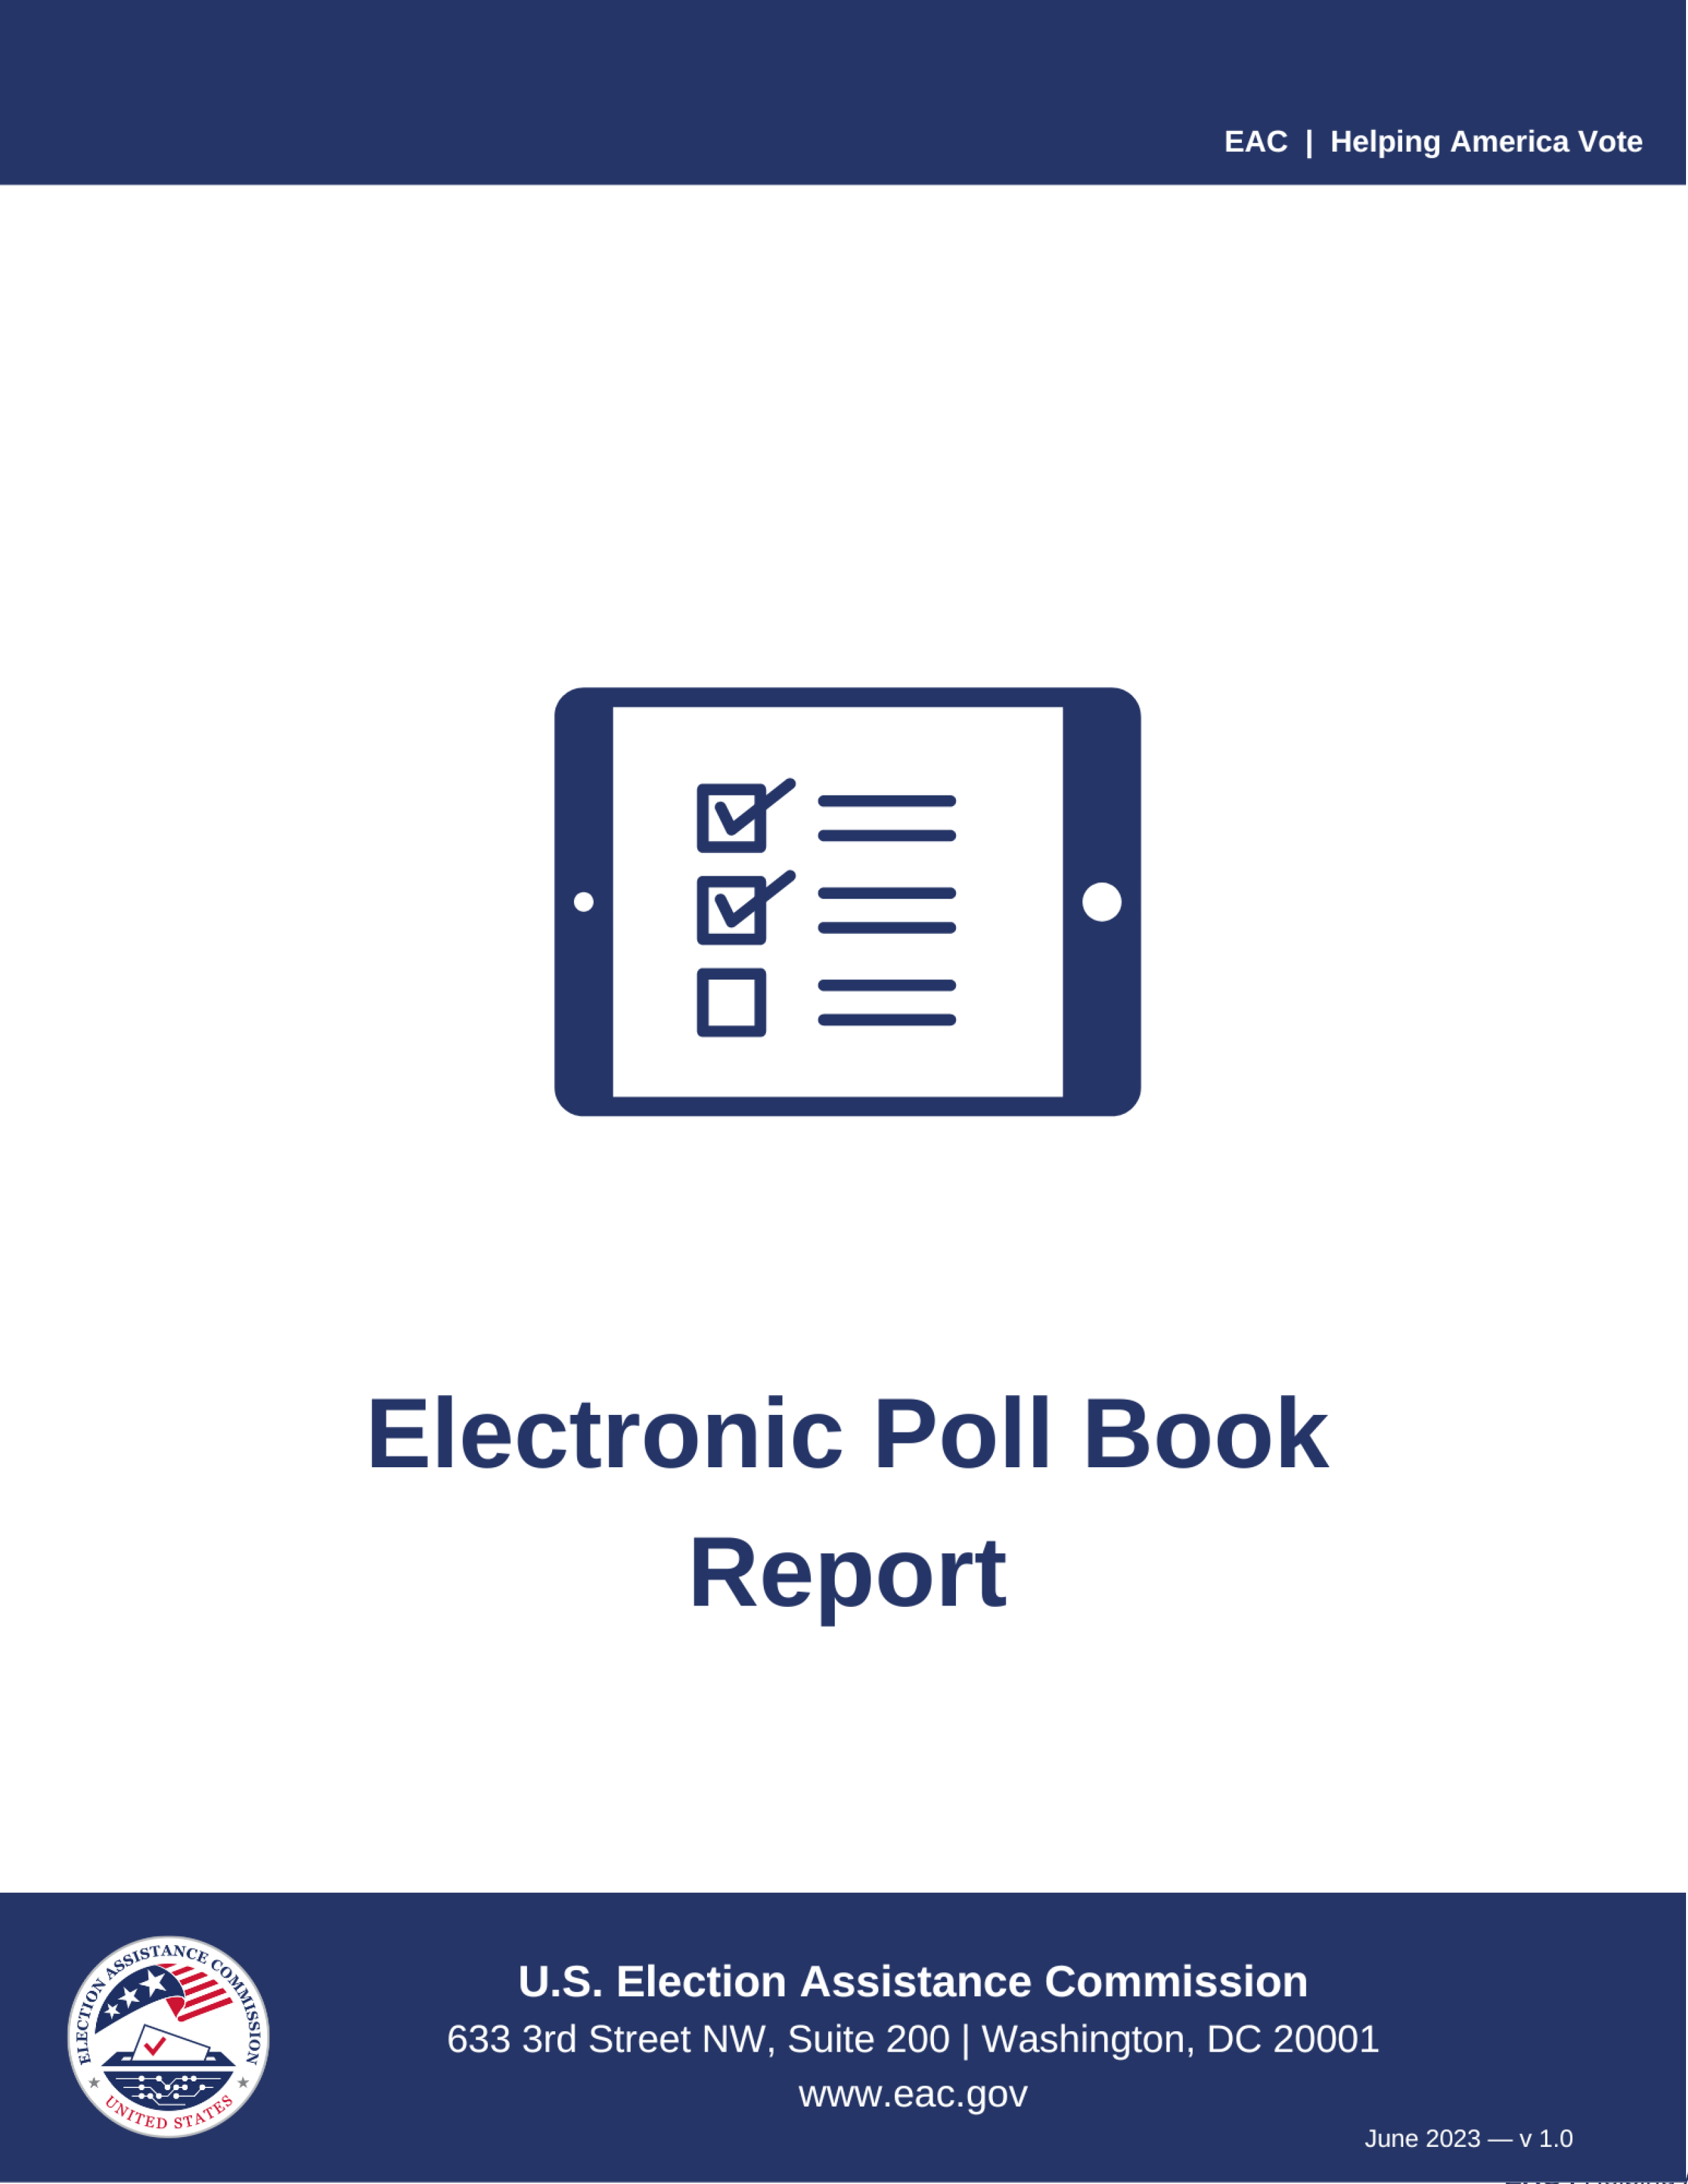 "Electronic Poll Book Report" cover with graphic of digital screen and checklist. EAC seal at bottom.